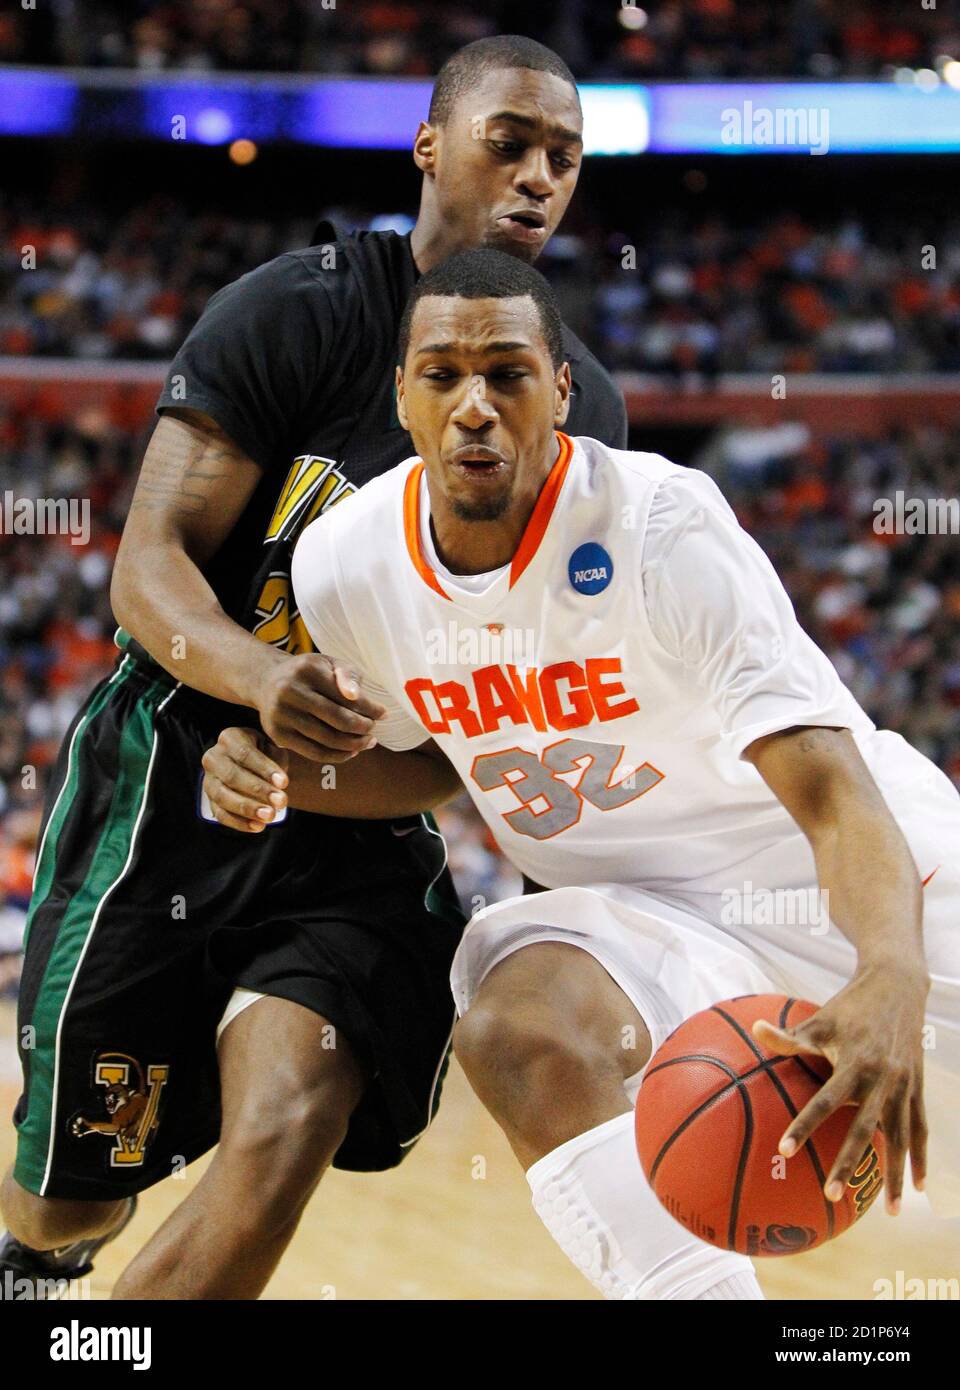 Syracuse's Kris Joseph is guarded by his brother, Vermont's Maurice Joseph (L) during the first half of their NCAA Division I Men's Basketball Tournament game in Buffalo, New York, March 19, 2010.     REUTERS/Mark Blinch (UNITED STATES - Tags: SPORT BASKETBALL) Stock Photo